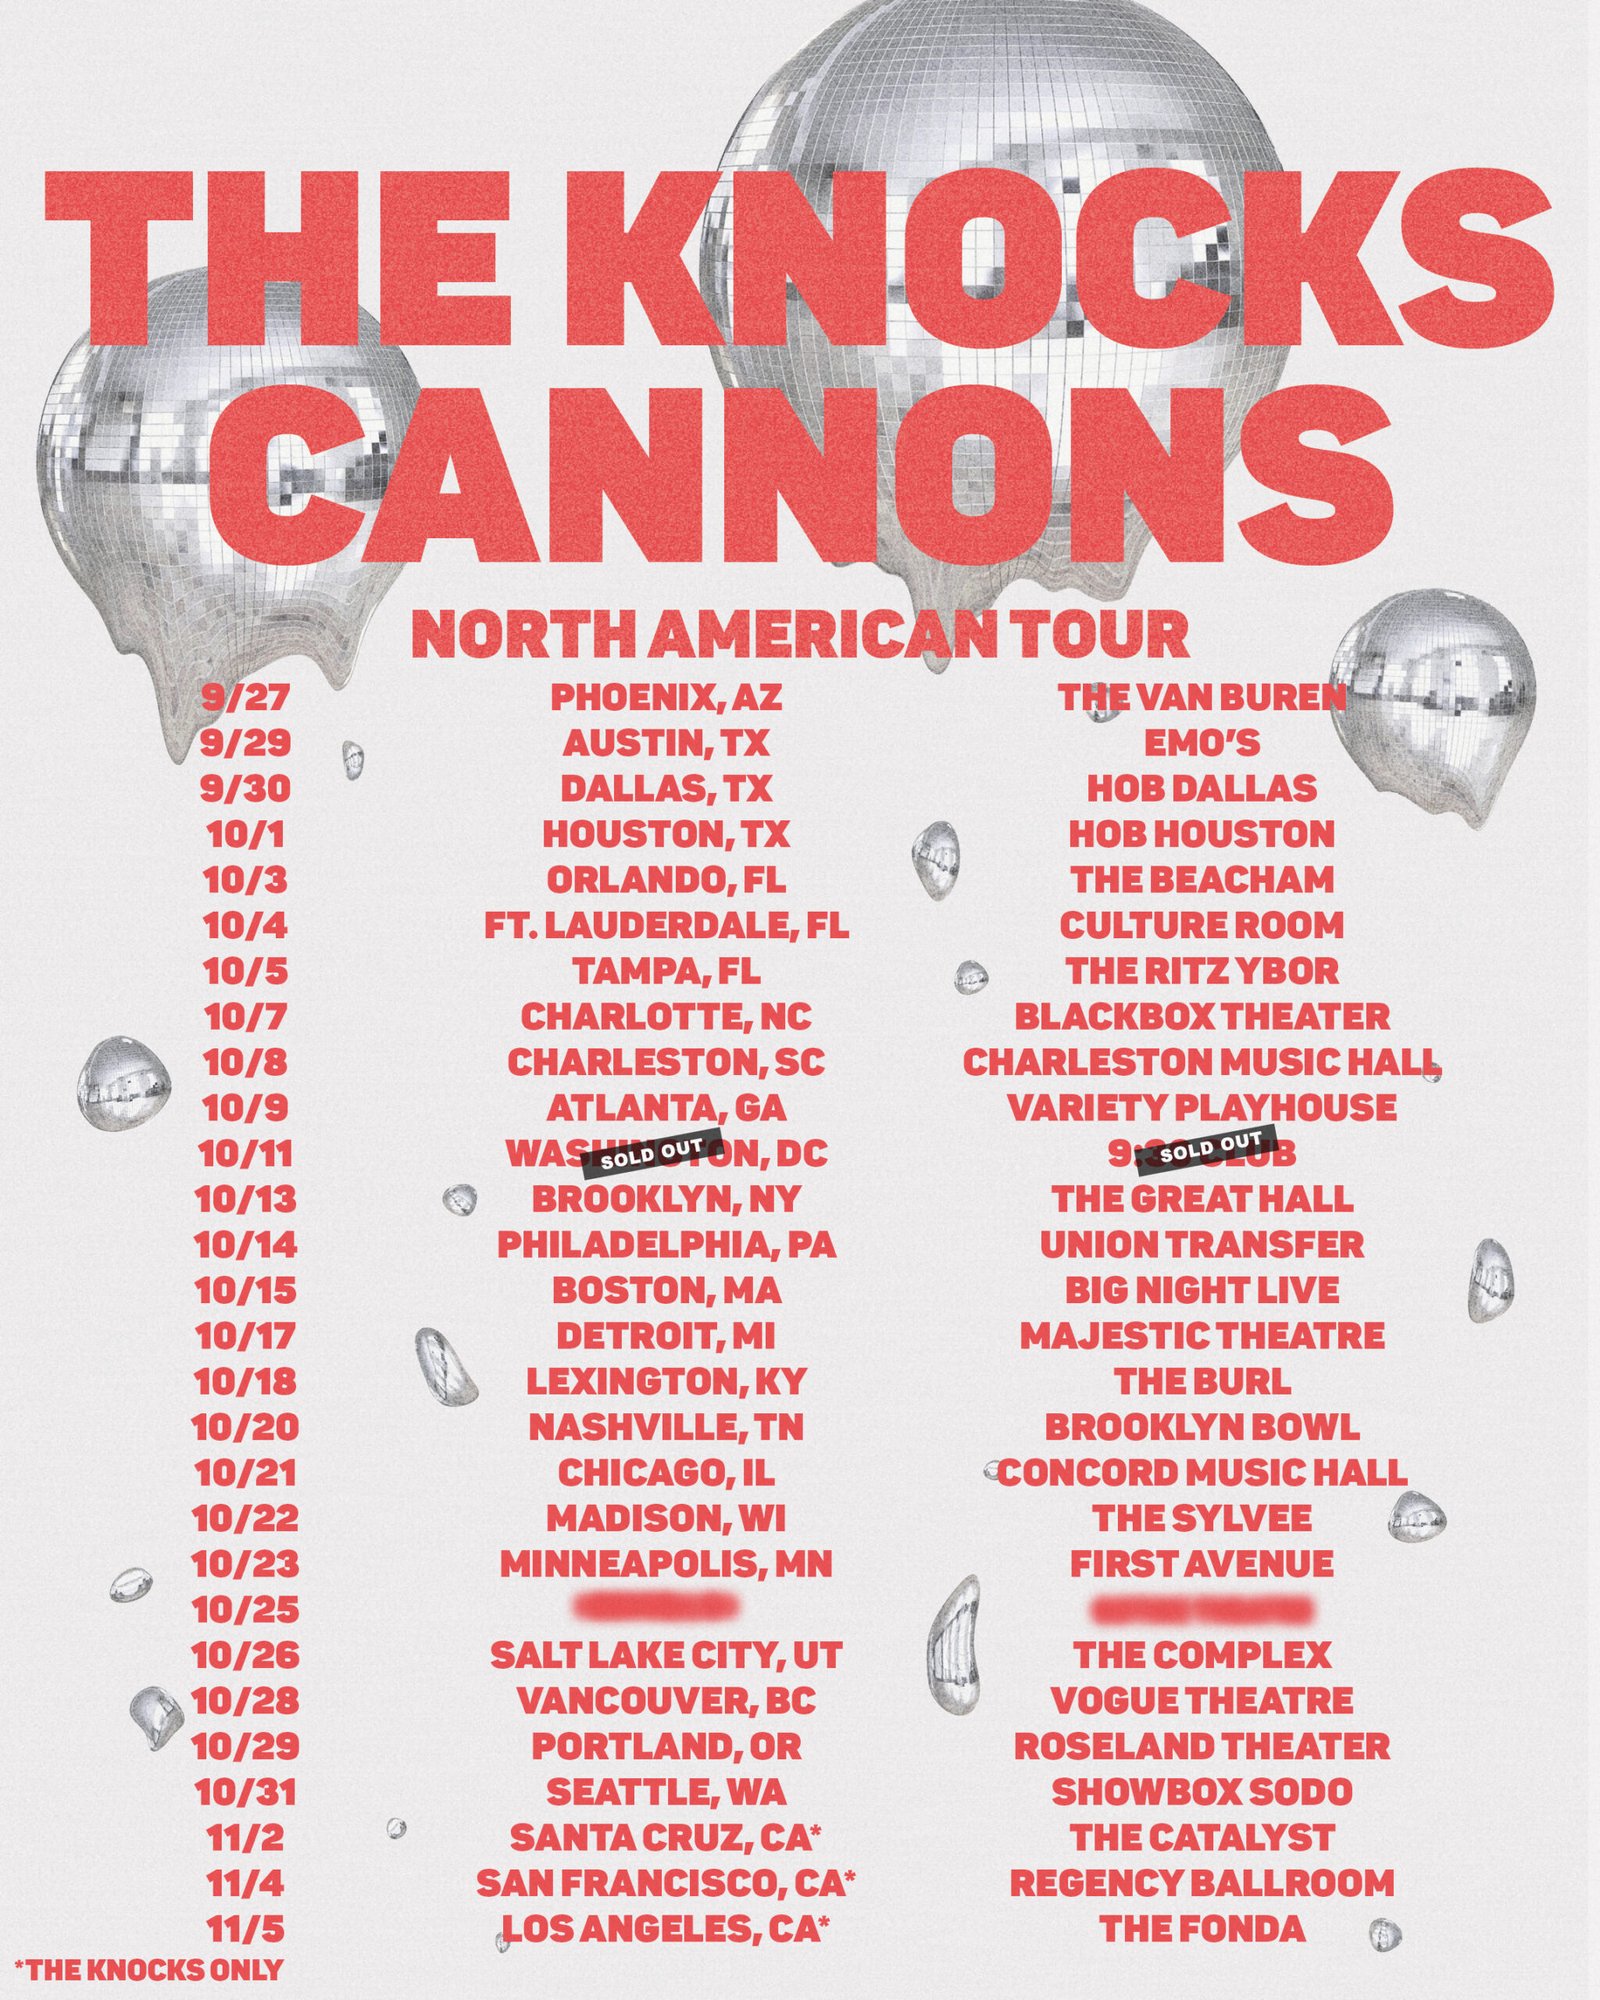 The Knocks & Cannons North American Tour Atlas Artist Group